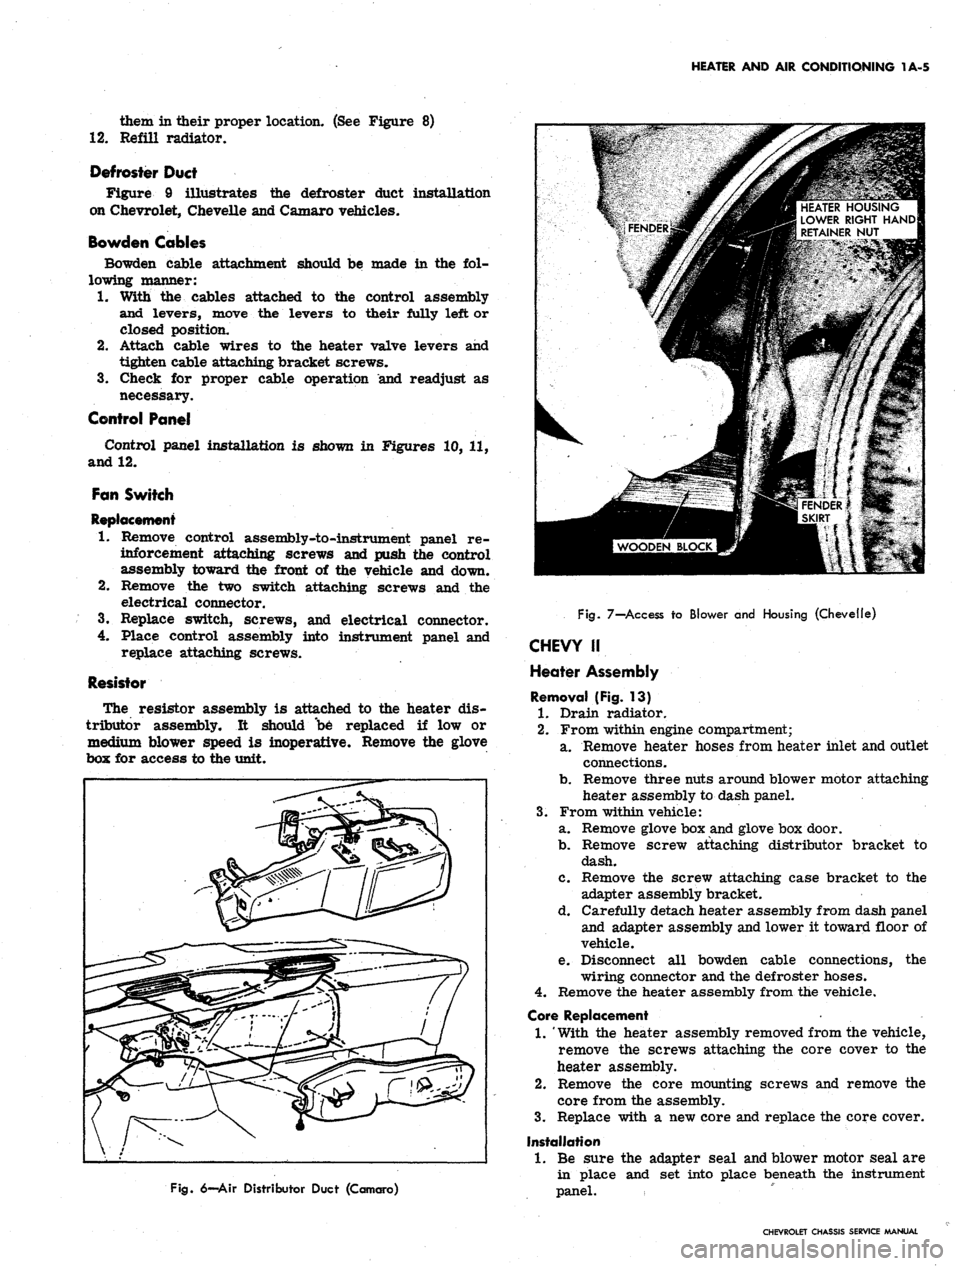 CHEVROLET CAMARO 1967 1.G Chassis User Guide 
HEATER AND AIR CONDITIONING 1A-5

them in their proper location. (See Figure 8)

12.
 Refill radiator.

Defroster Duct

Figure 9 illustrates the defroster duct installation

on Chevrolet, Chevelle an